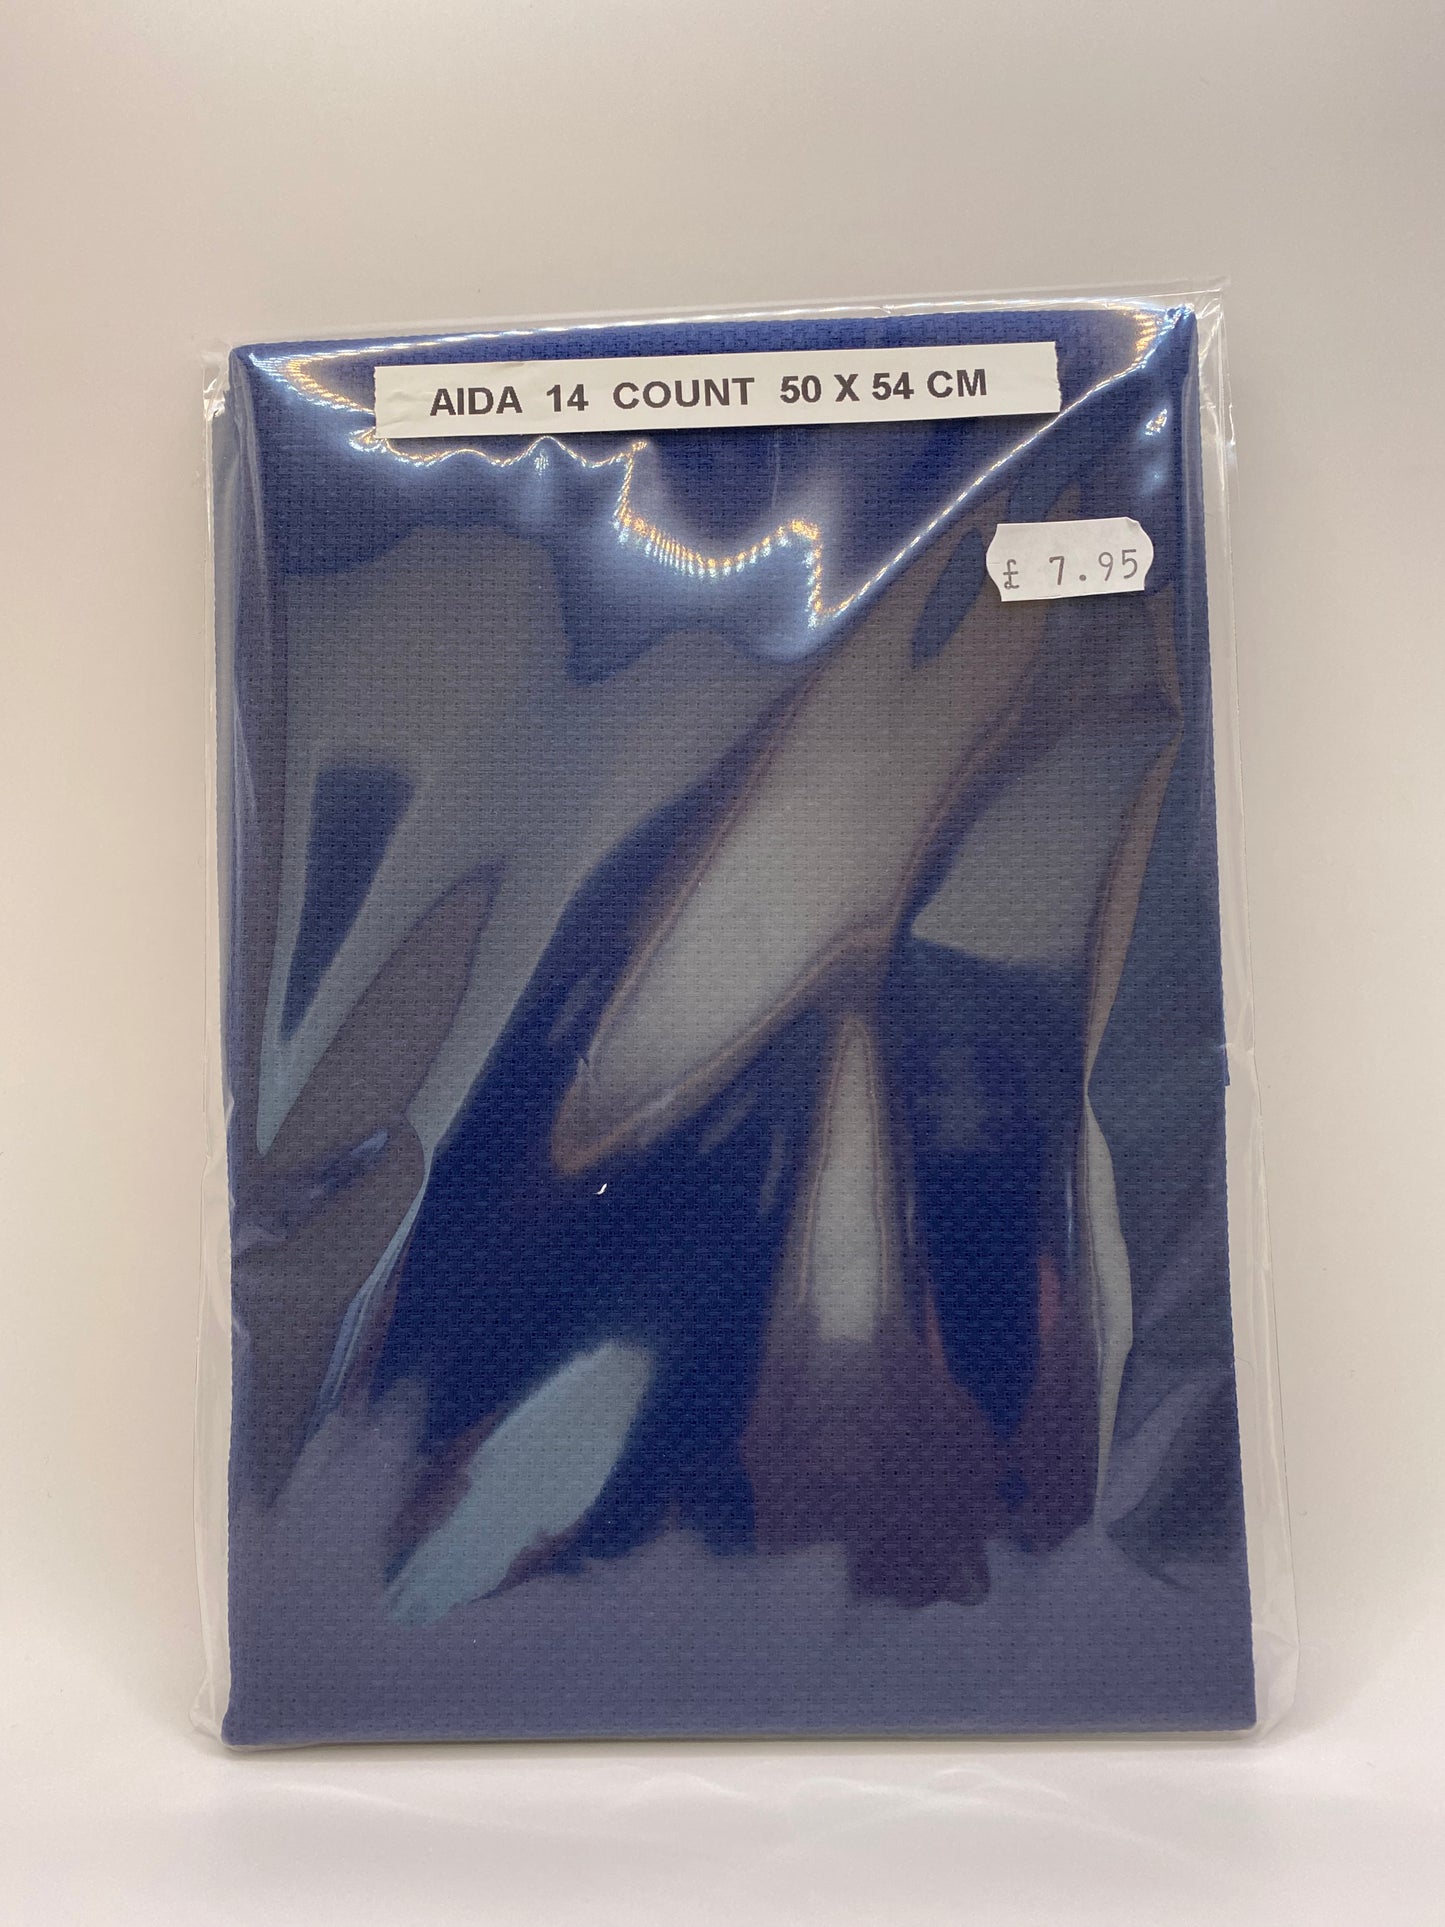 Aida 14 Count 50 x 54cm Pack of one - VARIOUS COLOURS